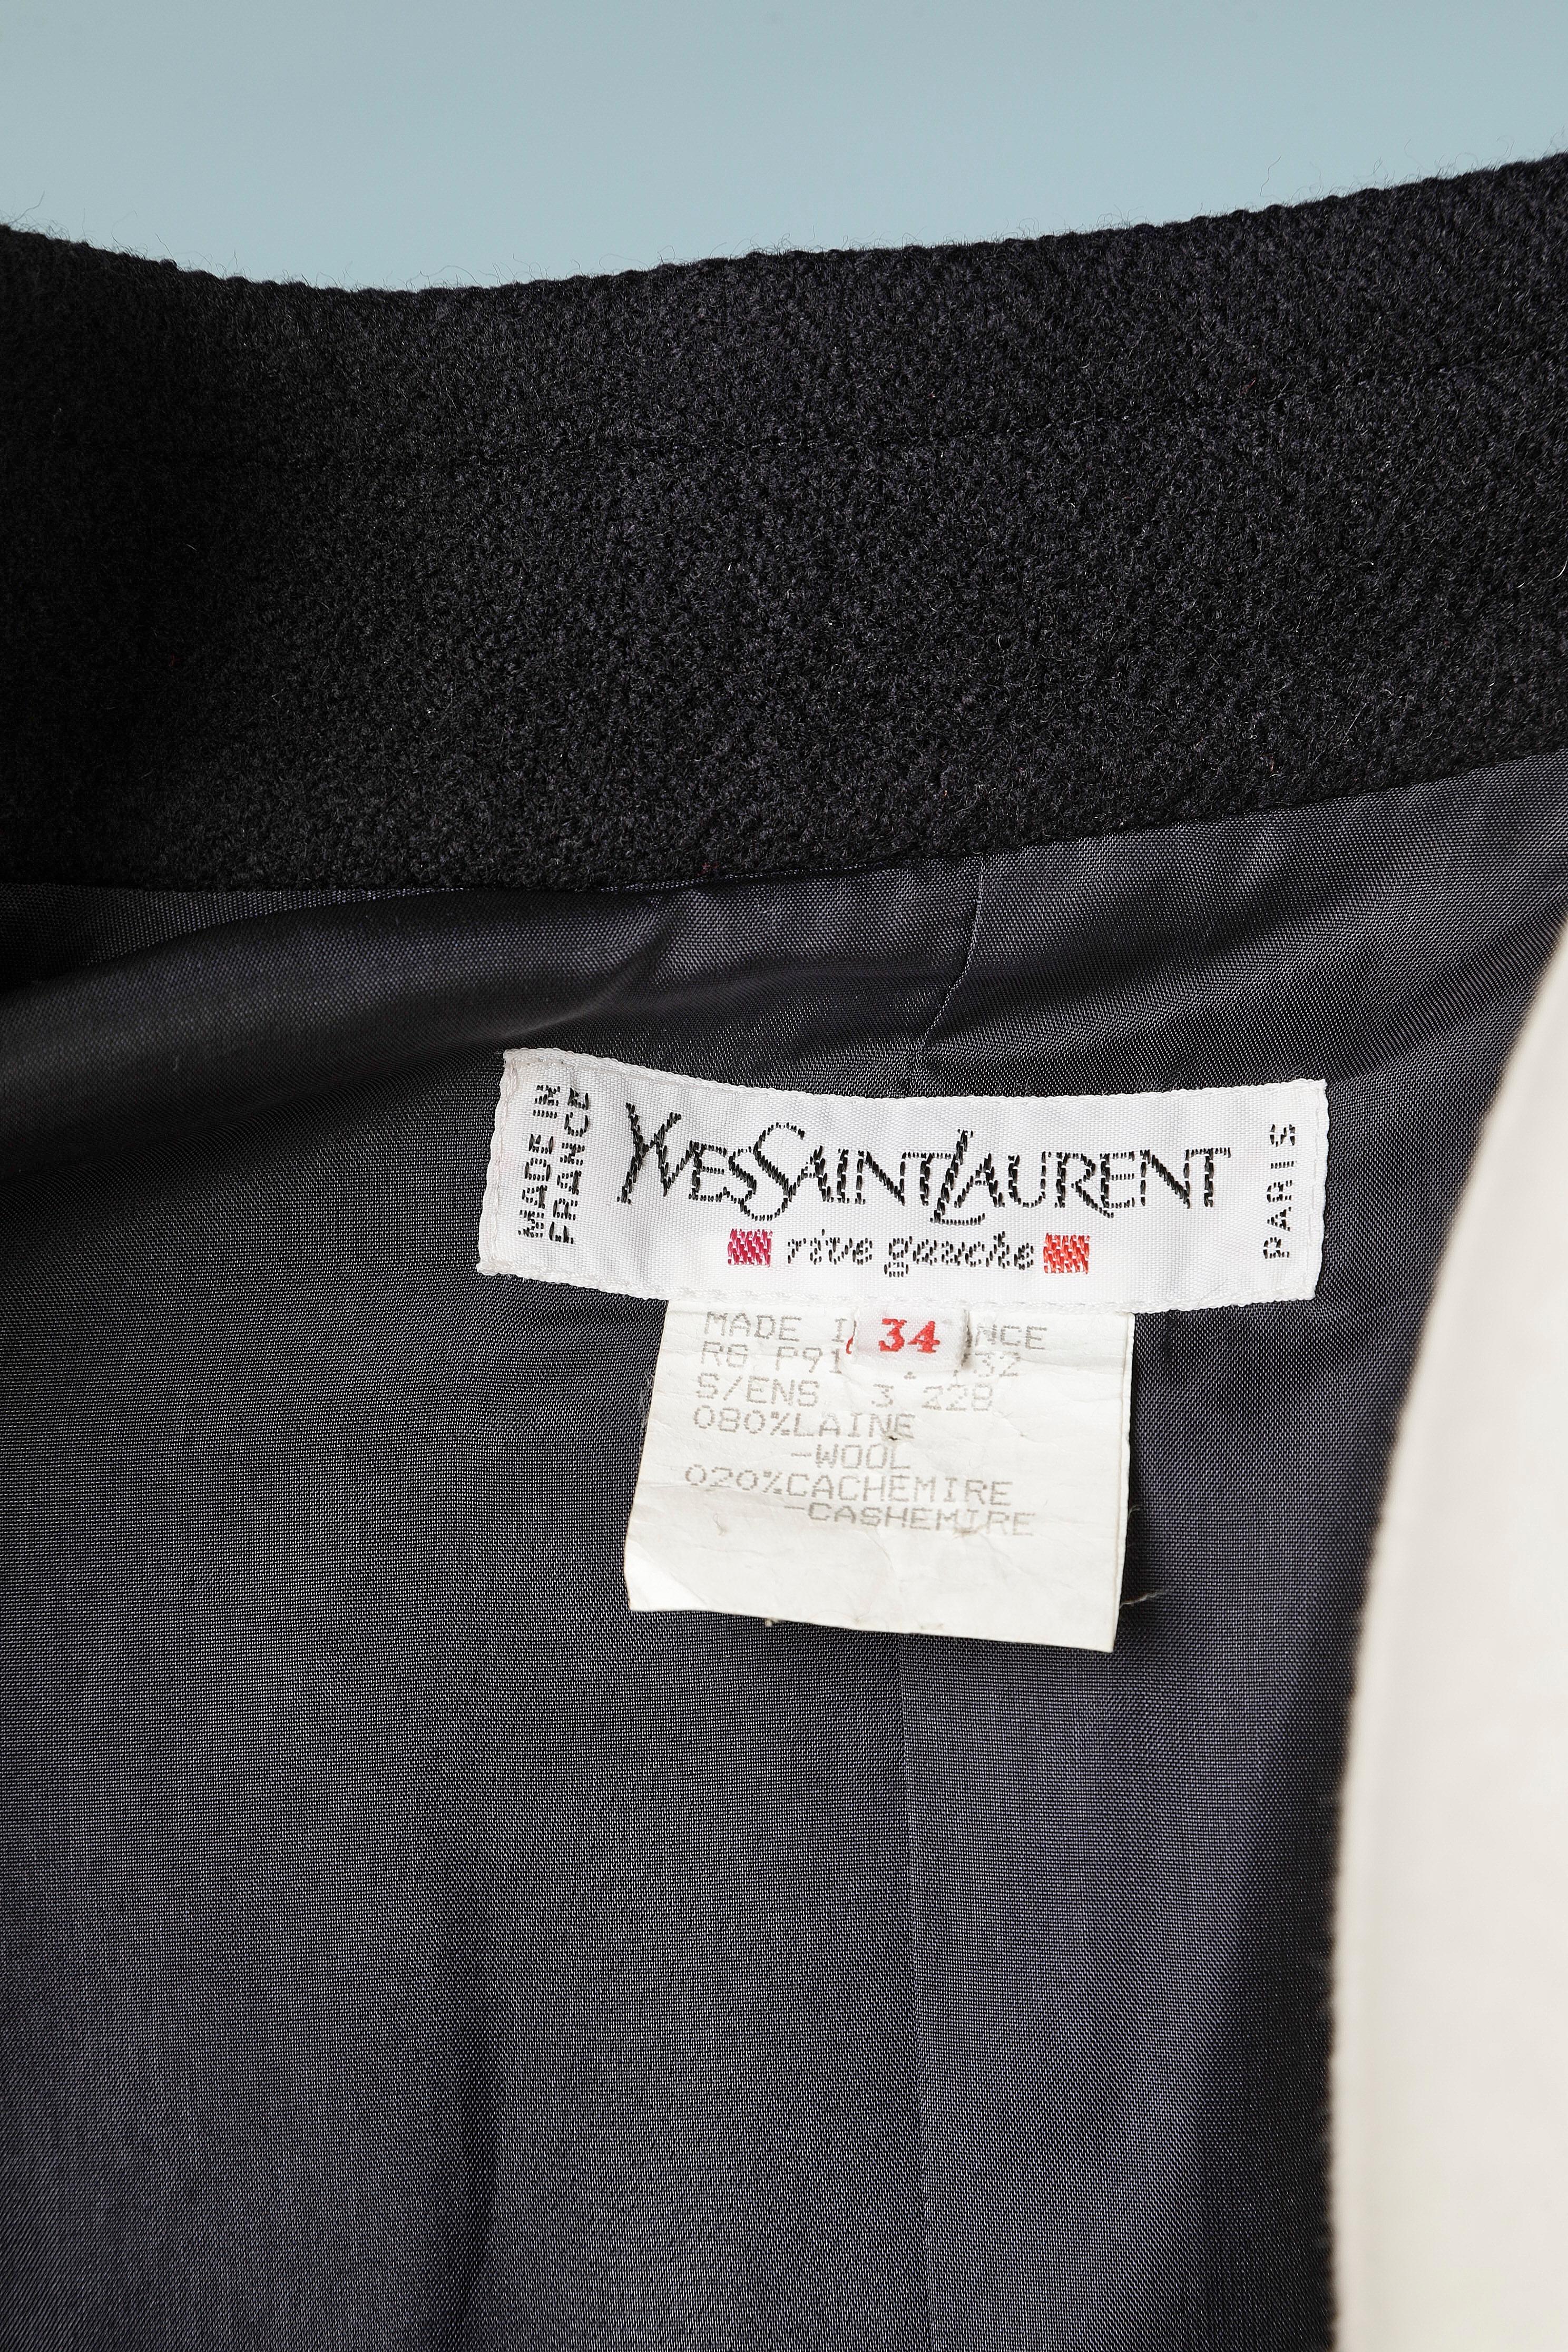 Black wool and cashmere skirt-suit Yves Saint Laurent Rive Gauche  For Sale 6